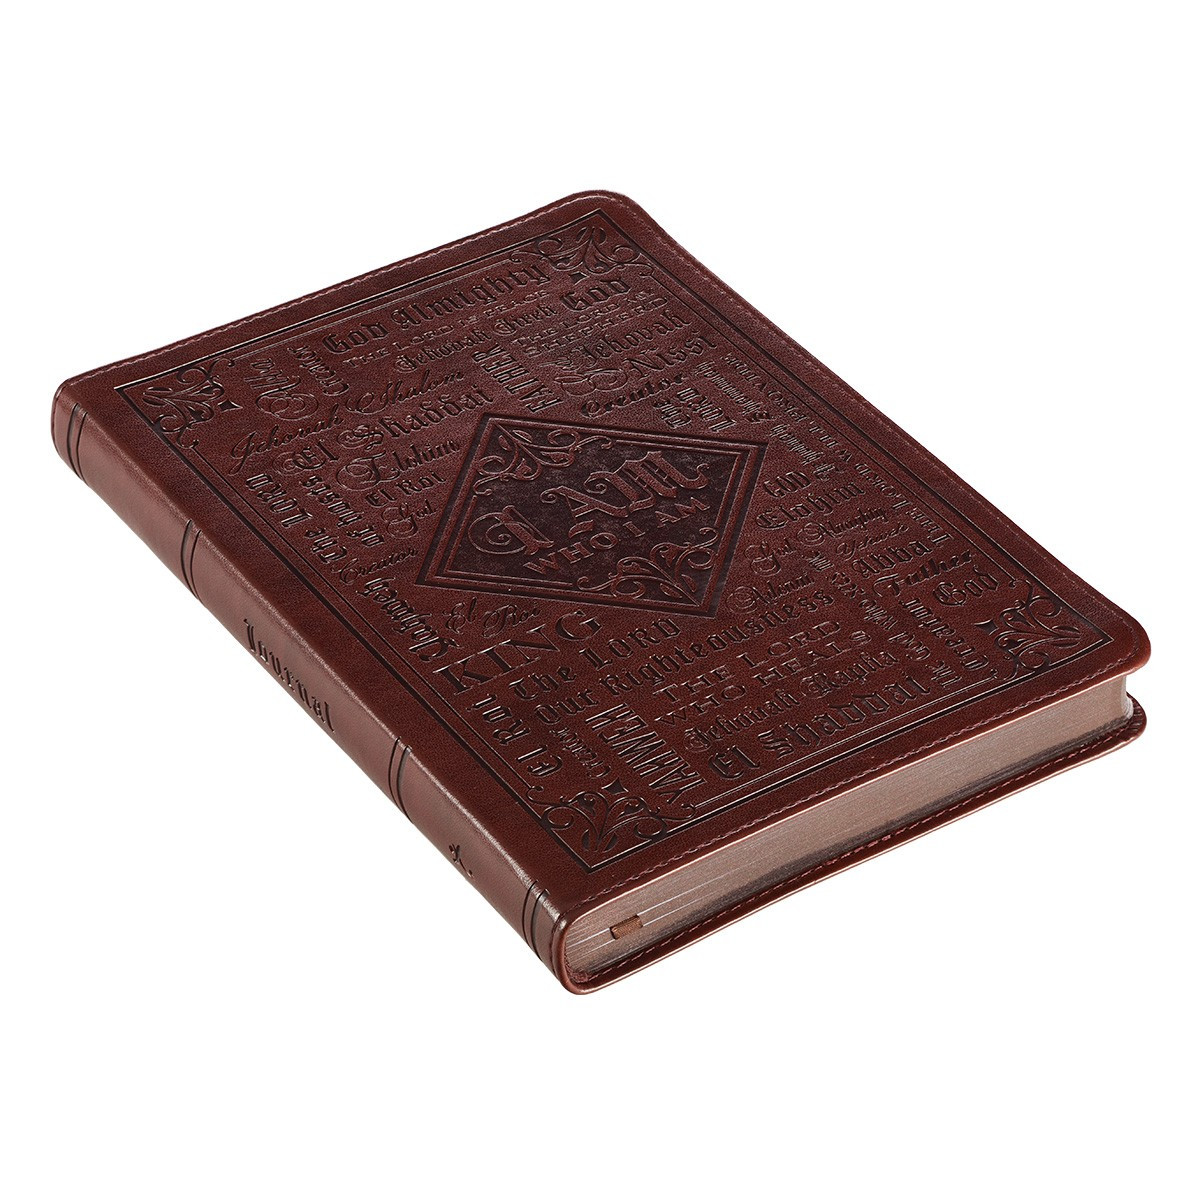 Names of God Chestnut Brown Faux Leather Classic Journal